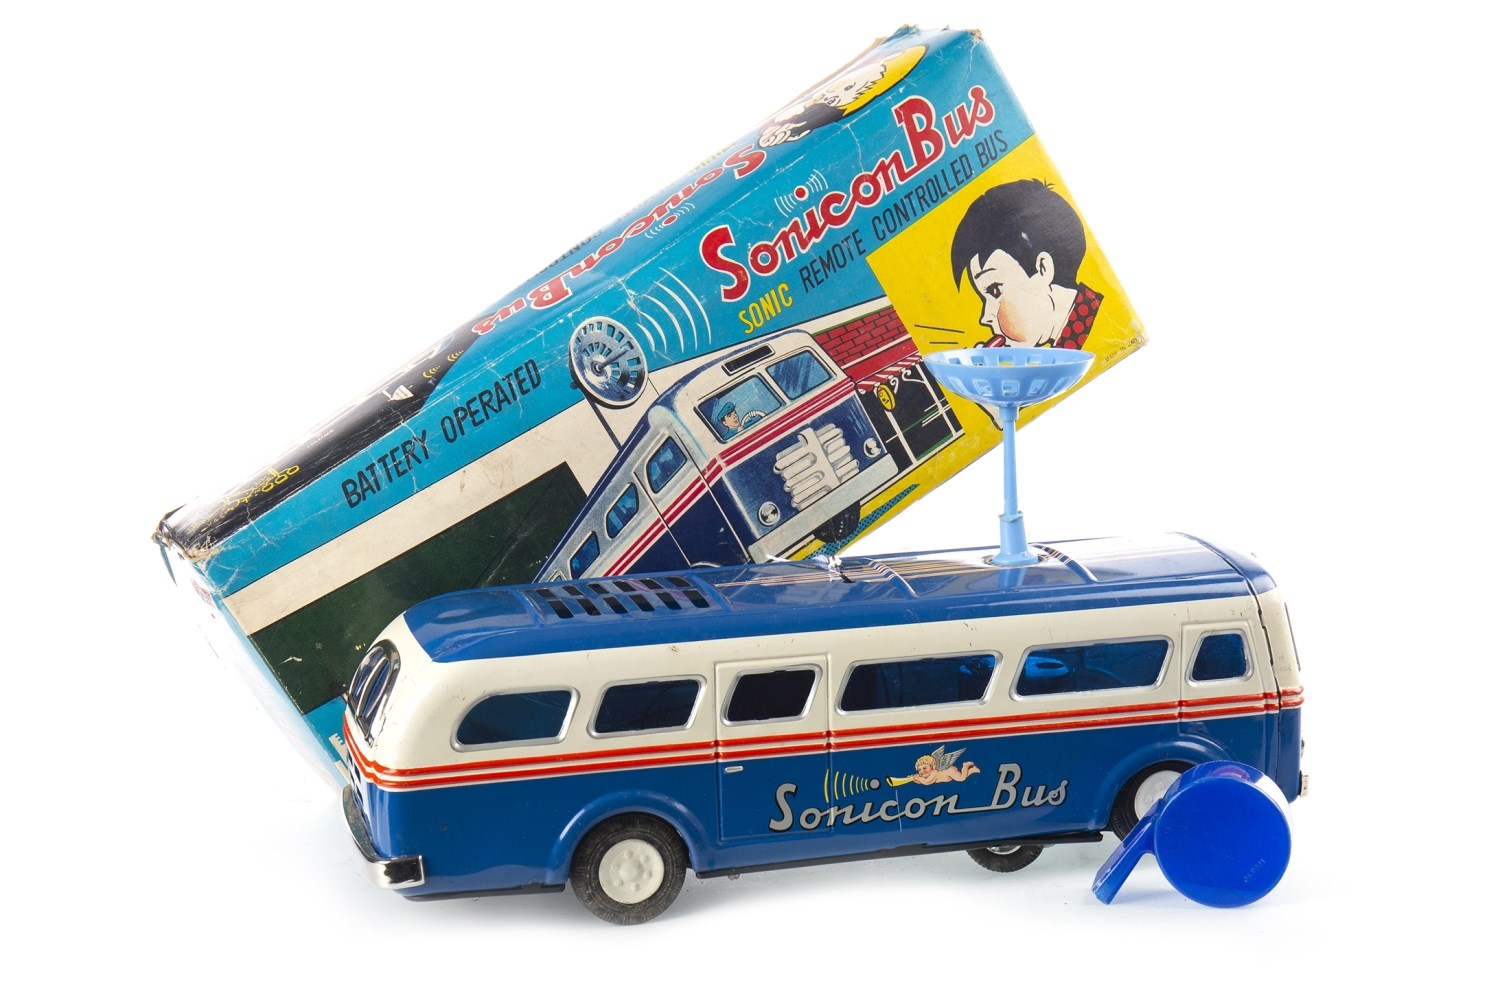 A BOXED SONICON BUS REMOTE CONTROLLED BUS